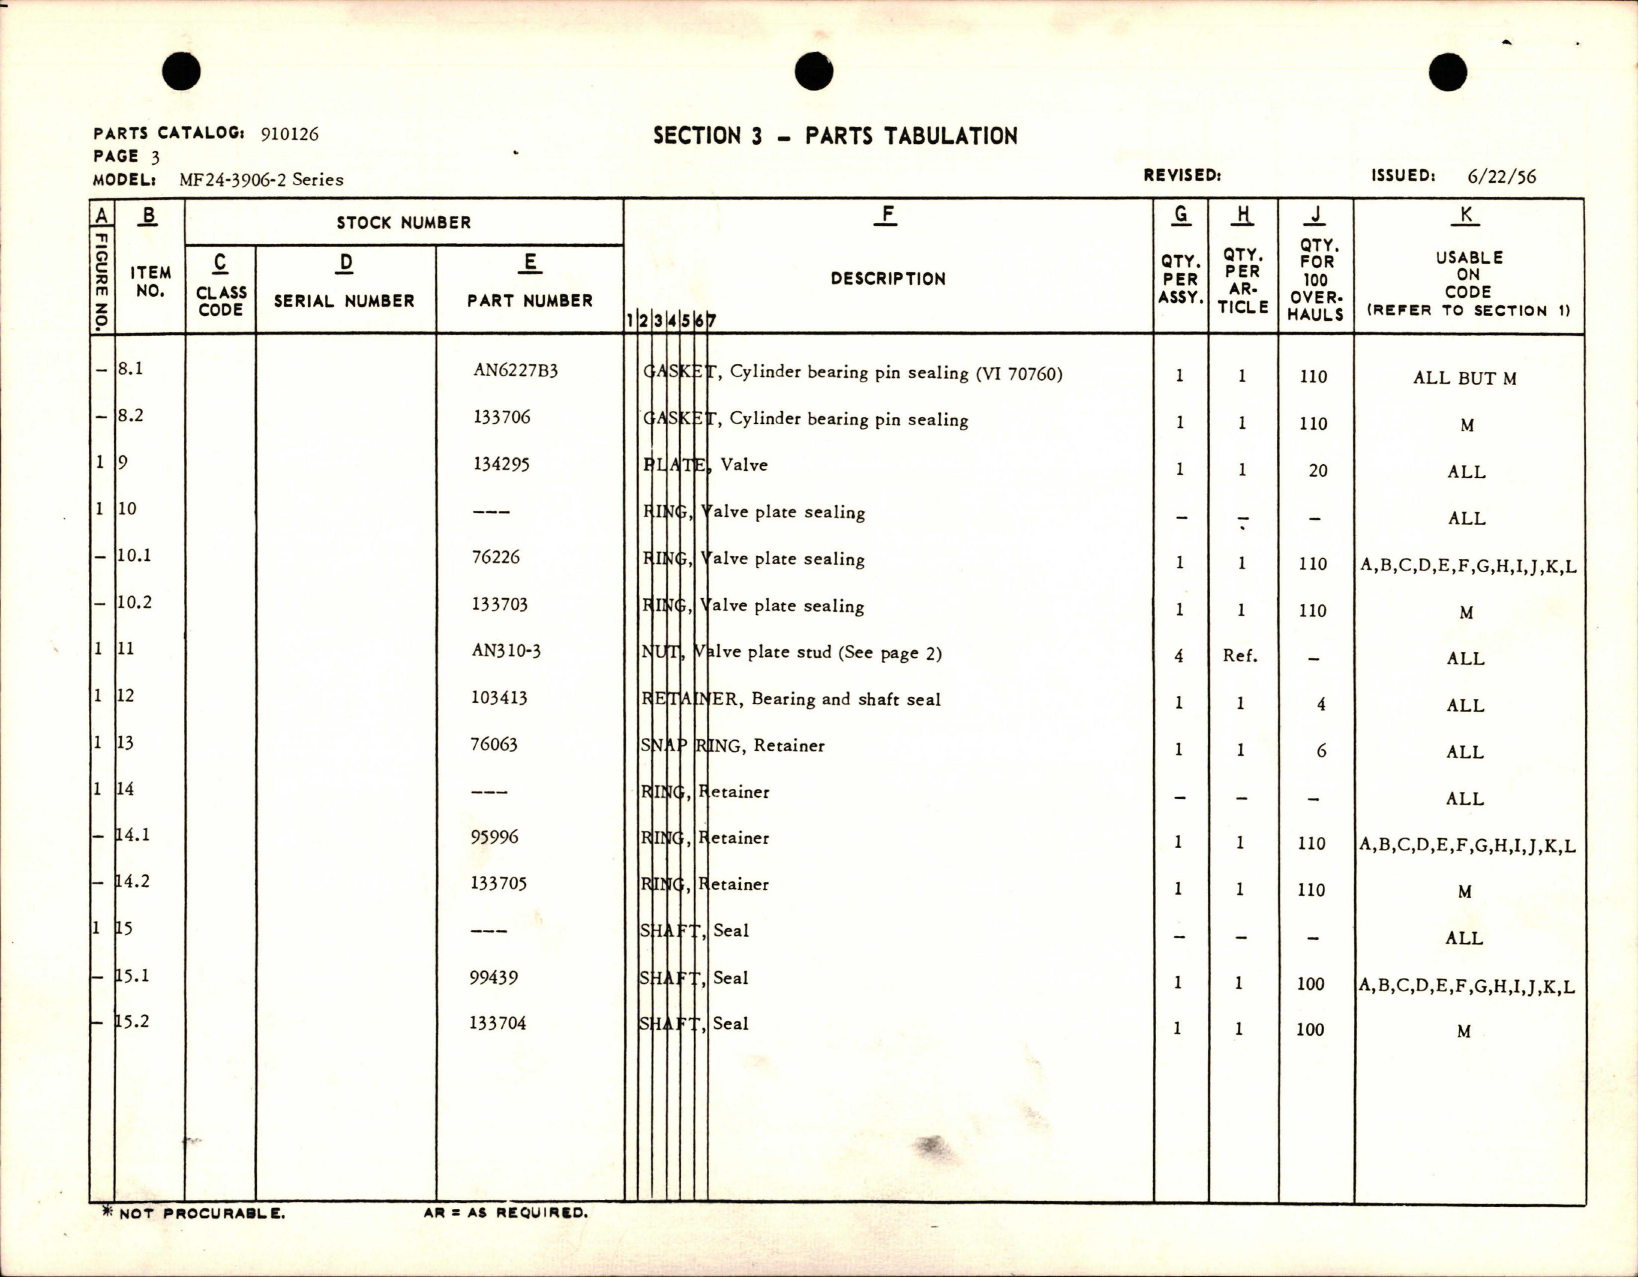 Sample page 5 from AirCorps Library document: Parts Catalog for Constant Displacement Motors - MF24-3906-2